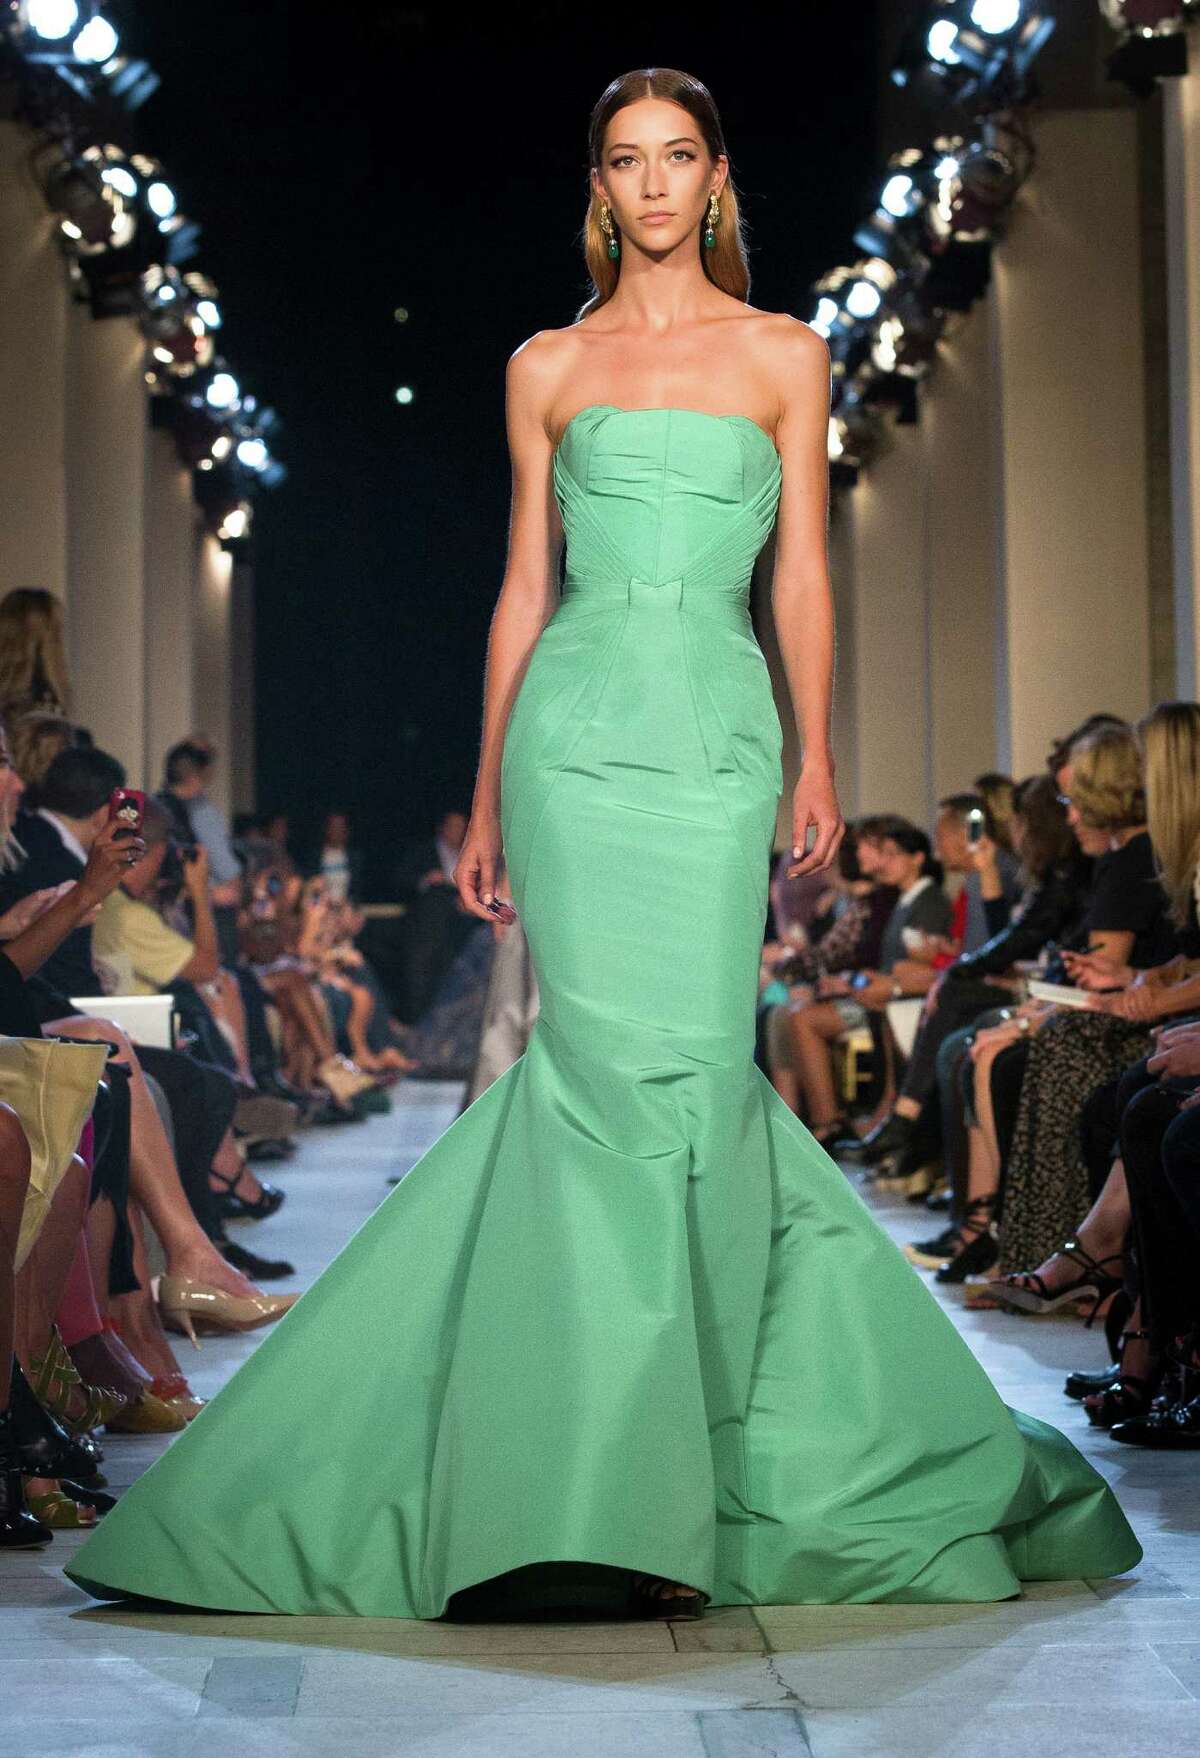 Emerald green selected Pantone's top color for 2013